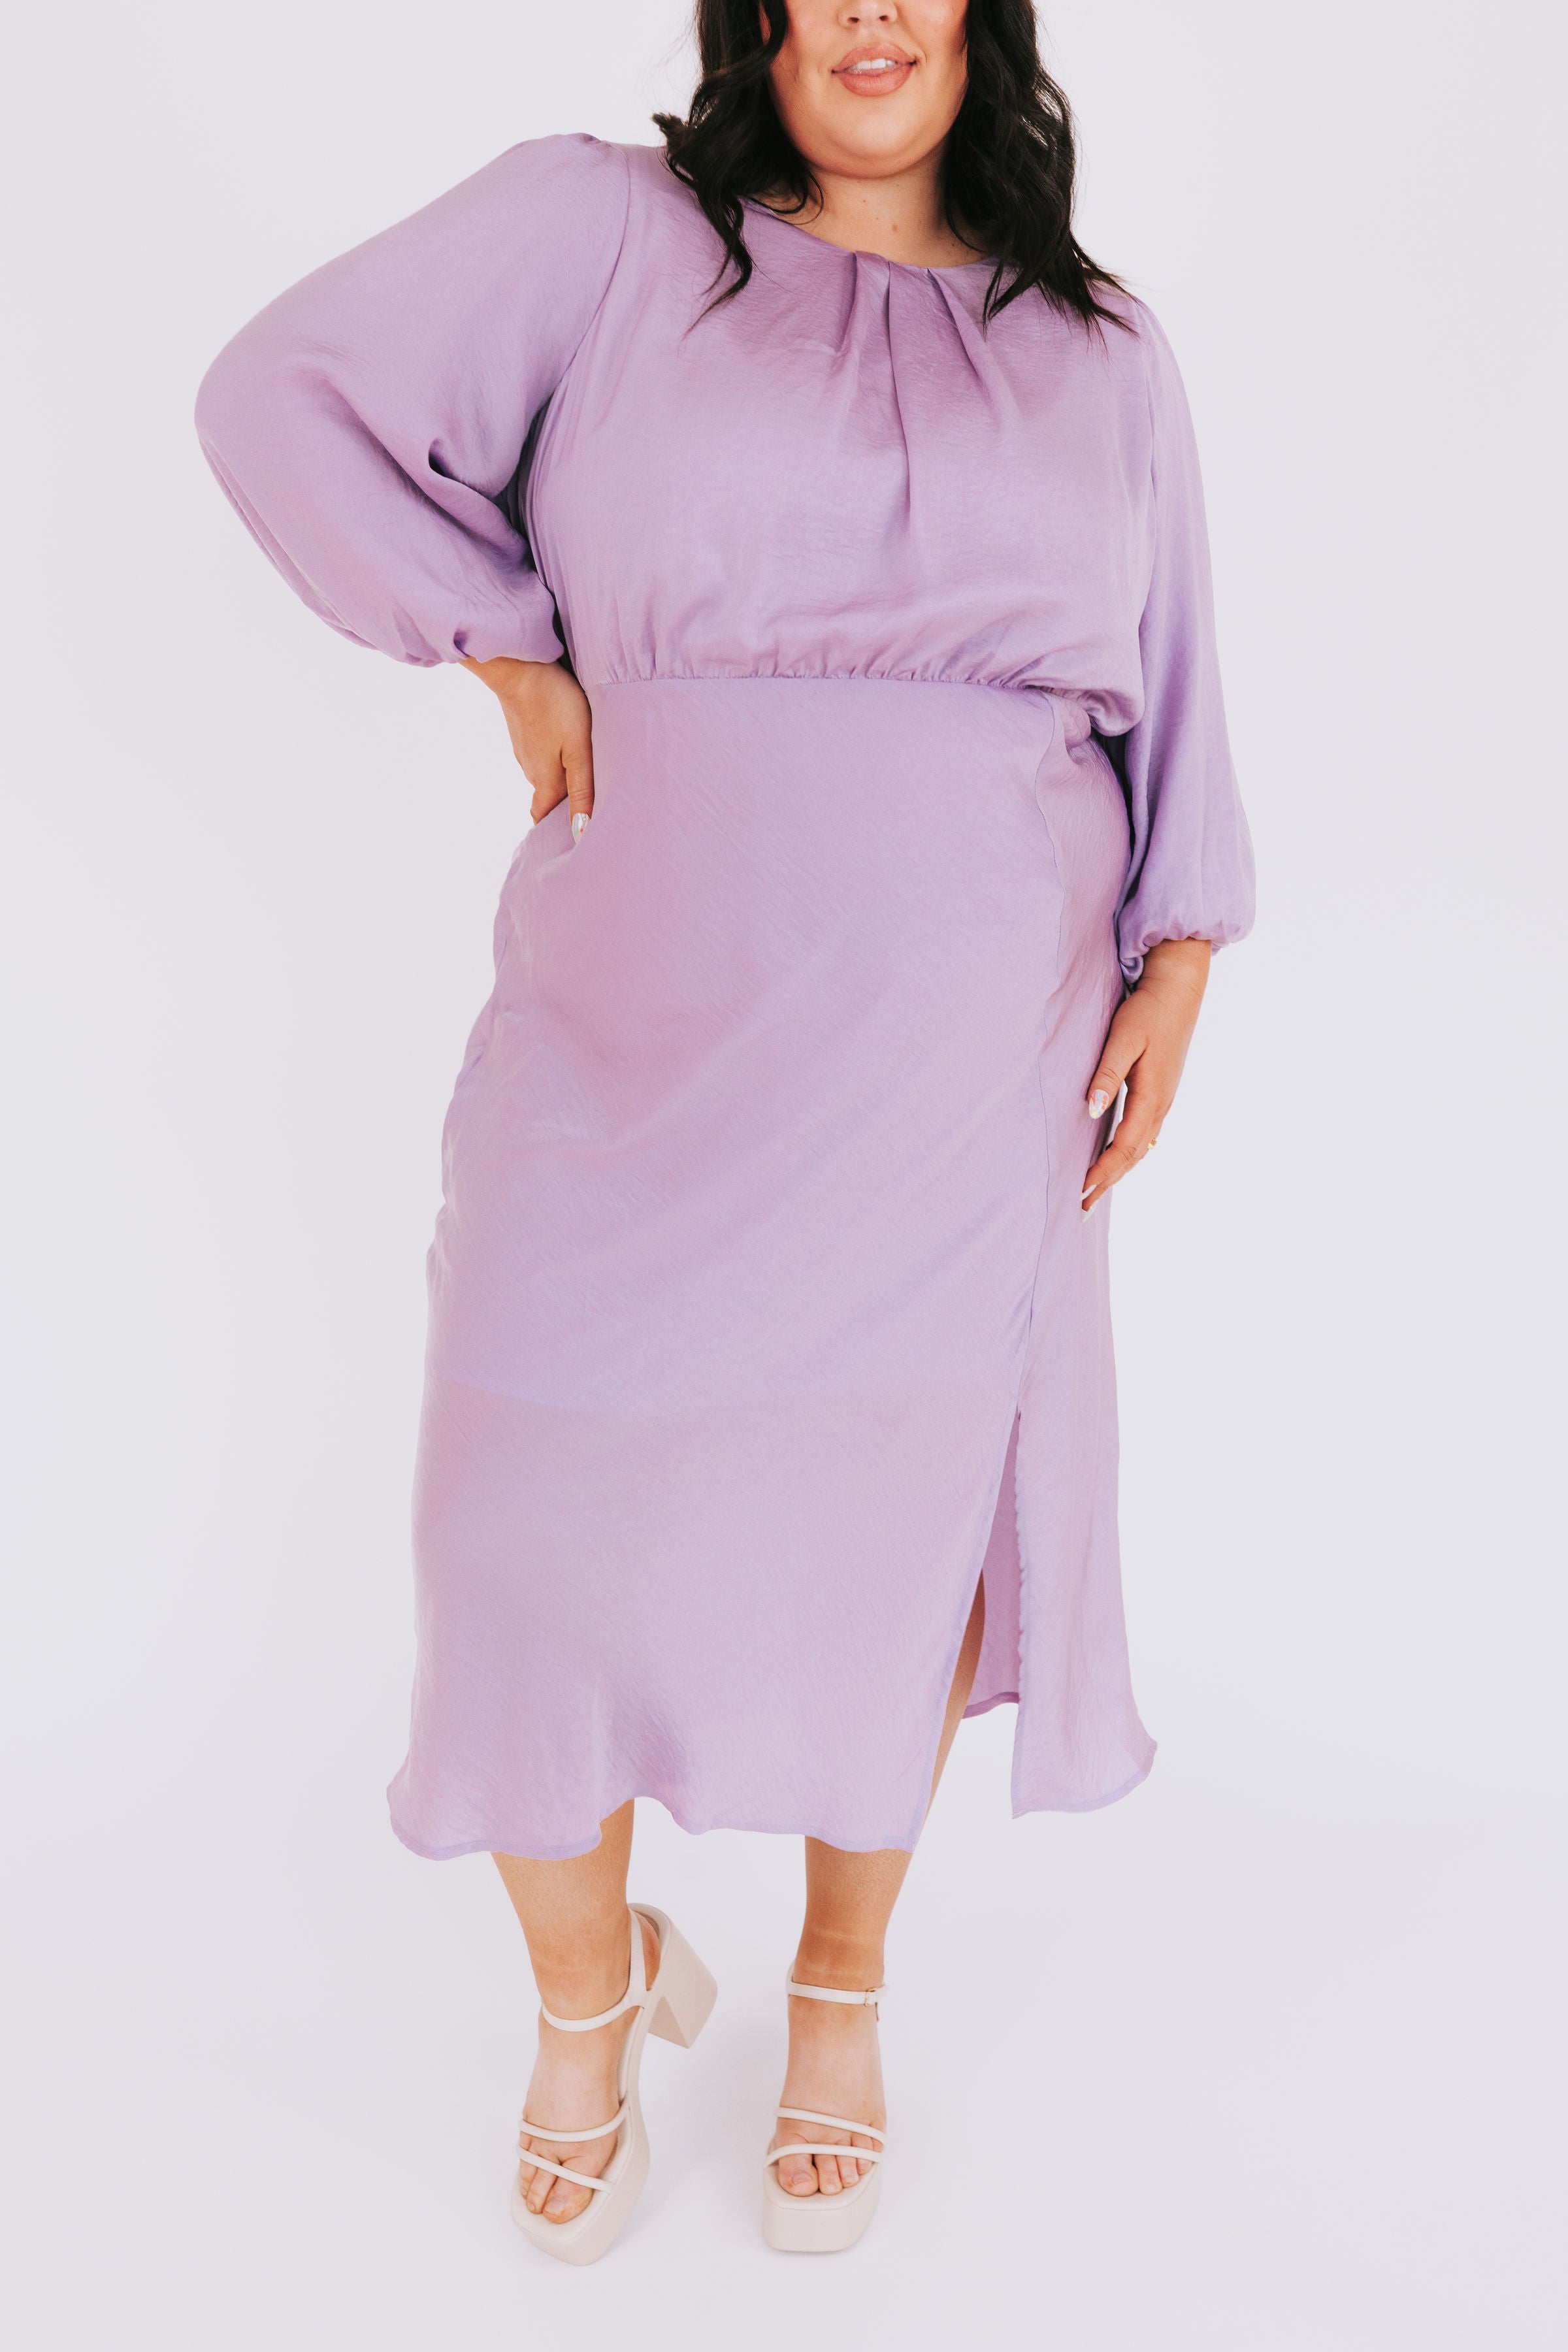 PLUS SIZE - Time Comes Around Dress